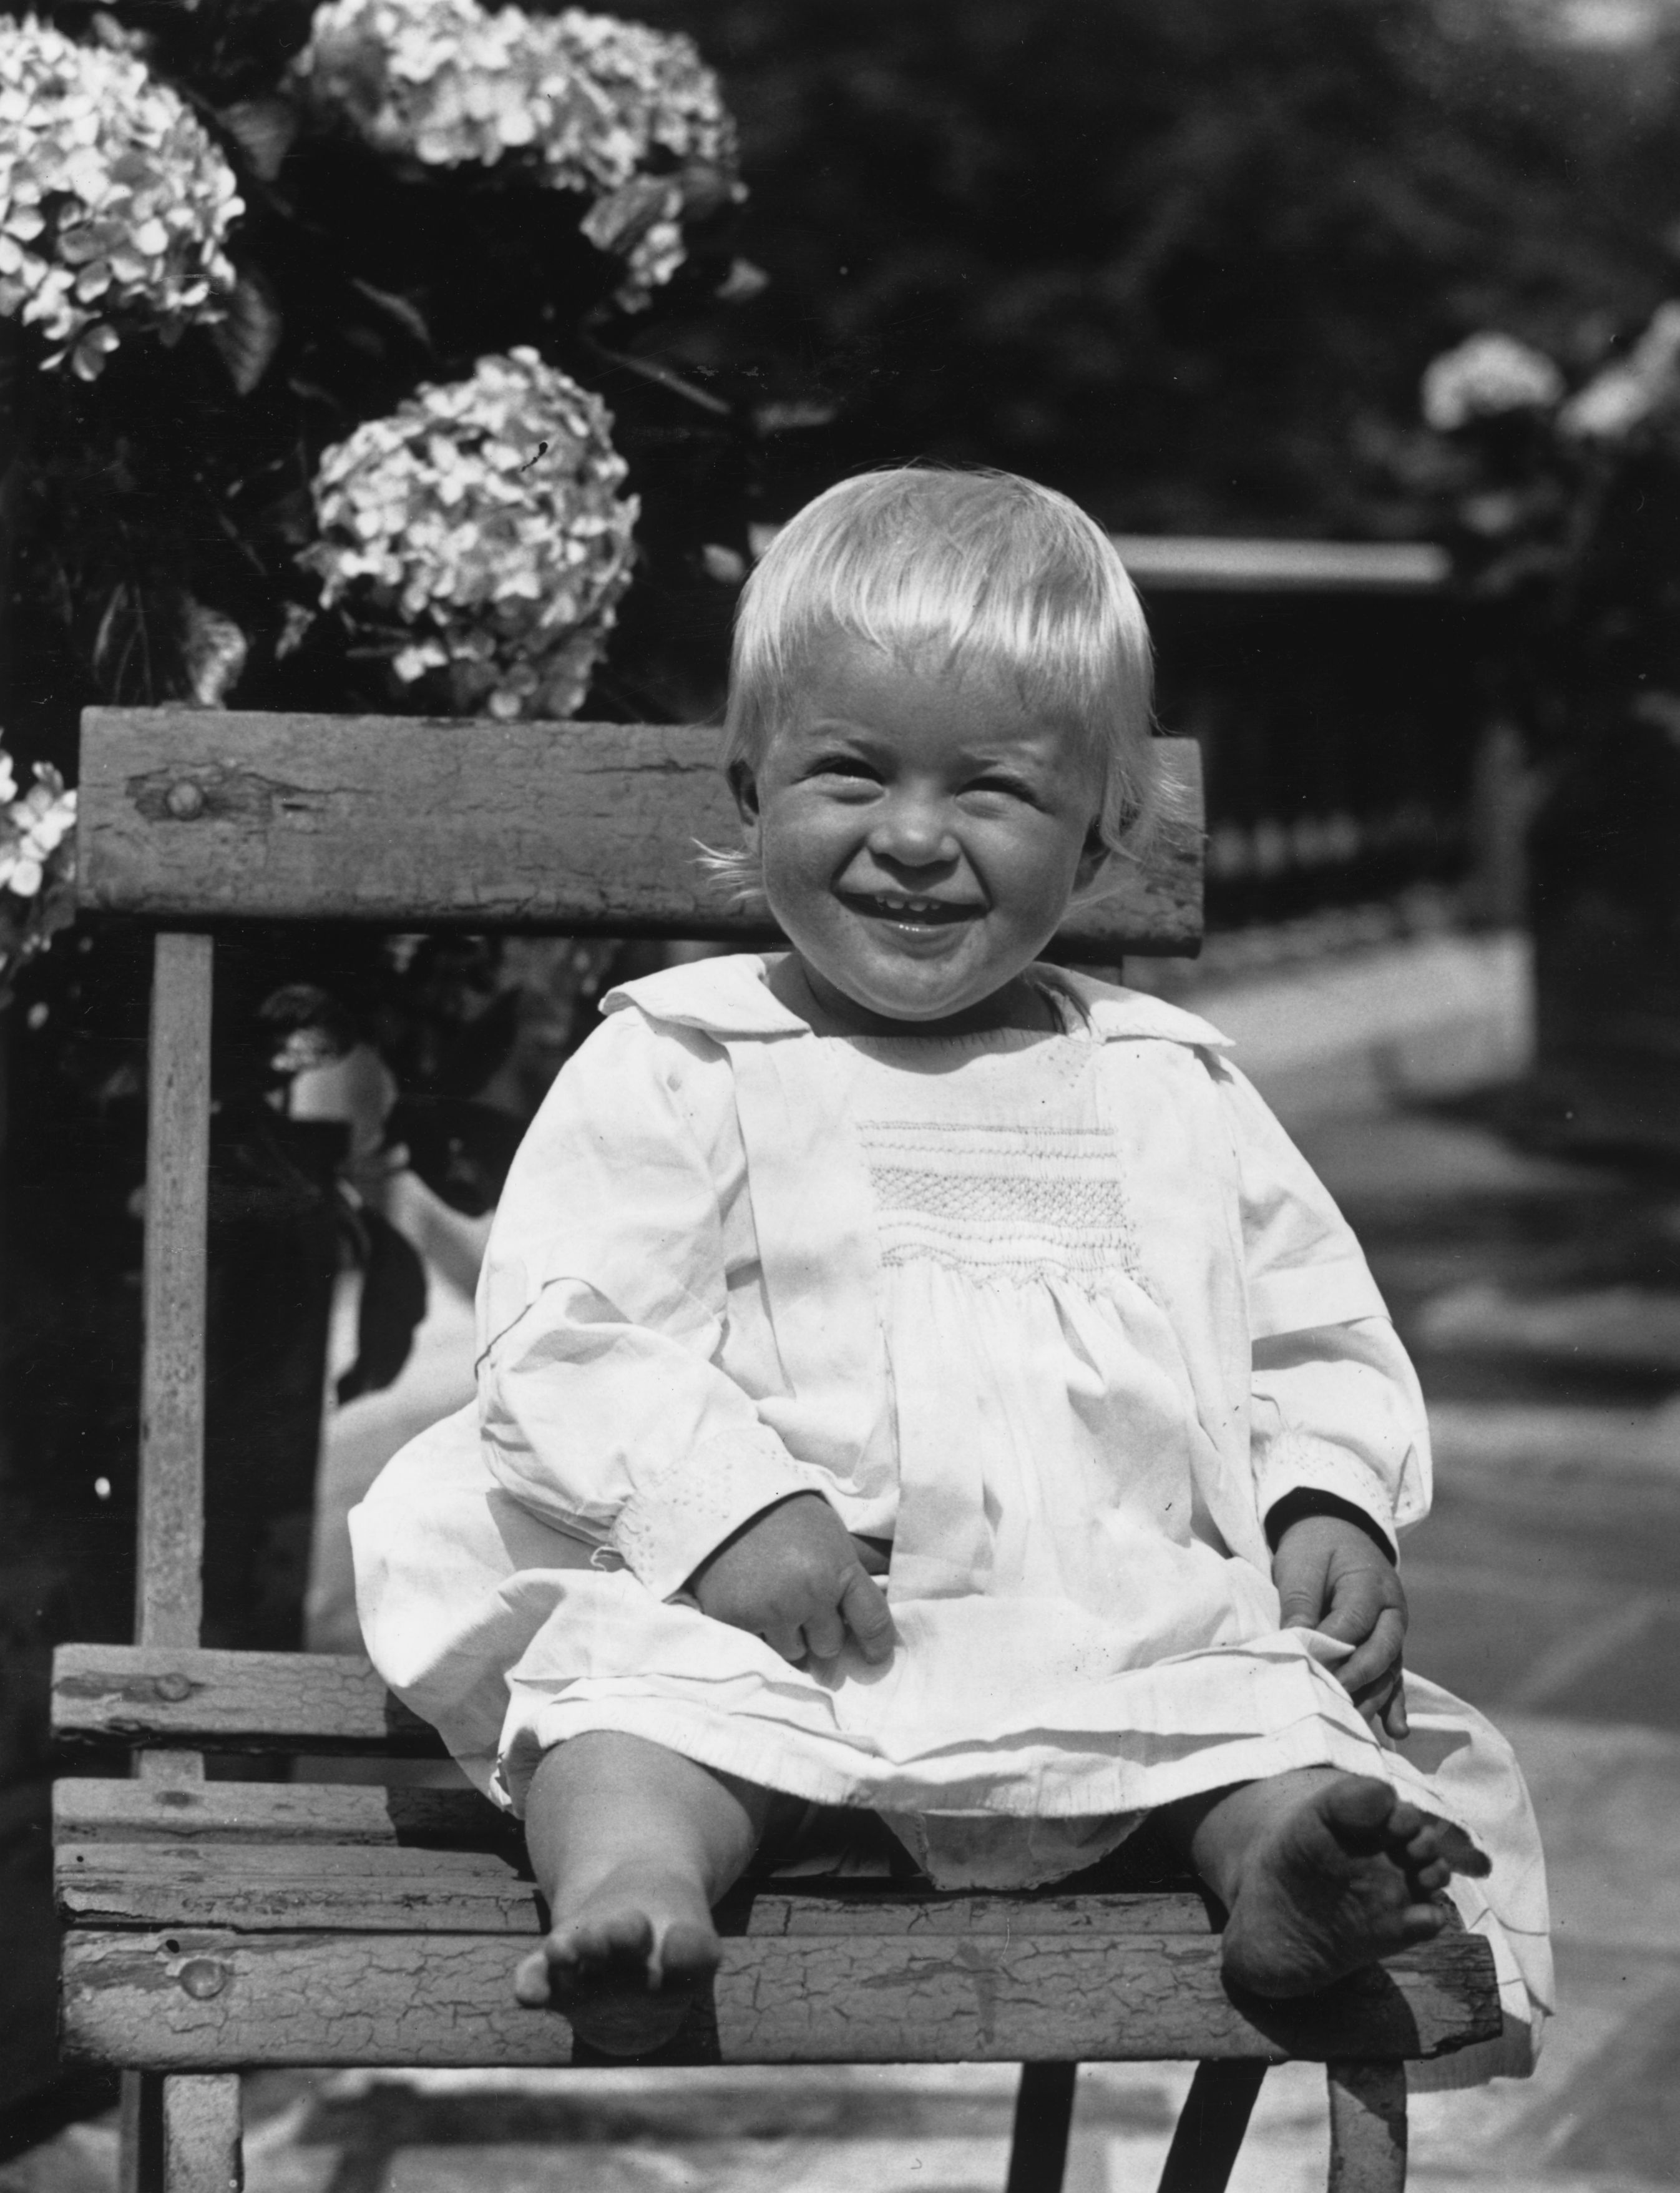 Prince Philip of Greece, later Duke of Edinburgh, as a toddler, July 1922 | Photo: Getty Images